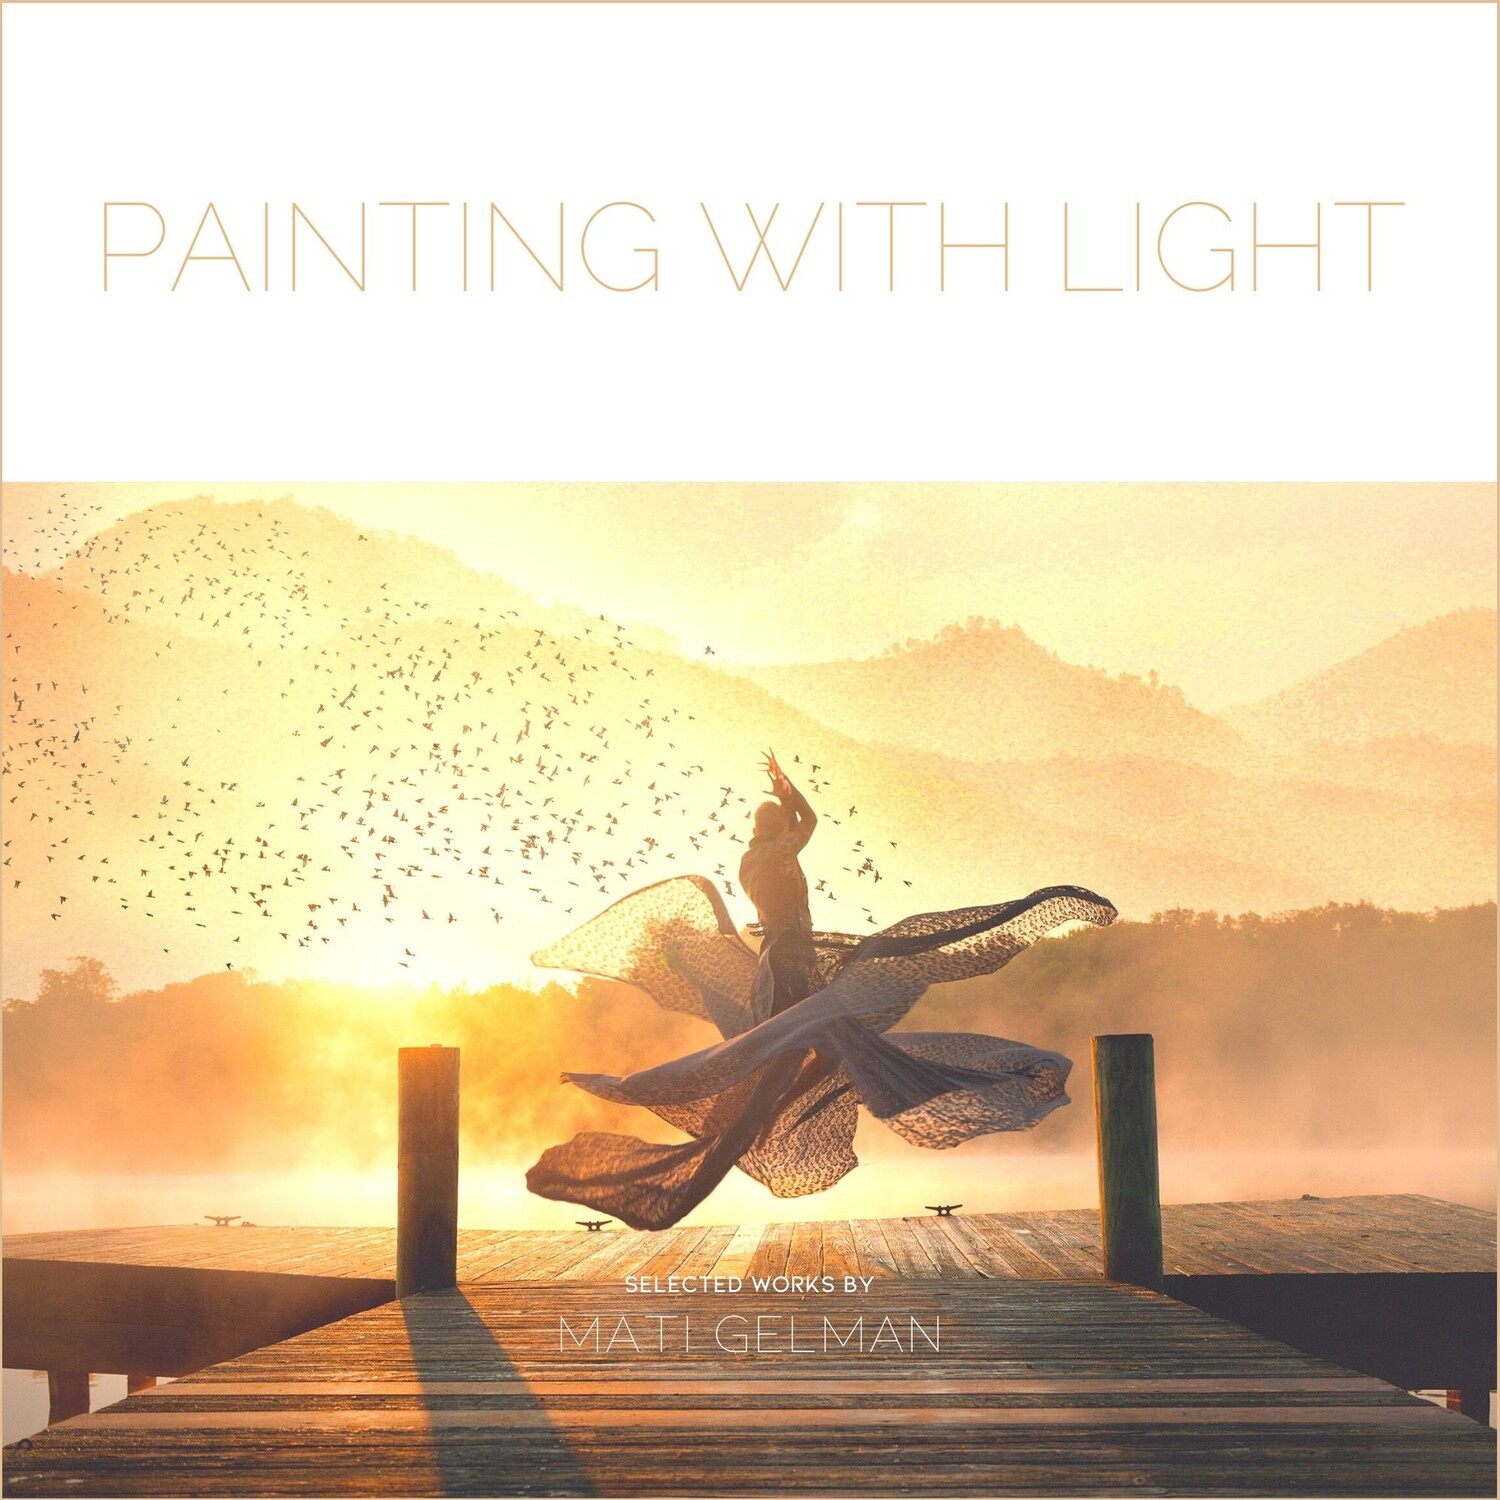 "Painting With Light" - Selected Works by Mati Gelman